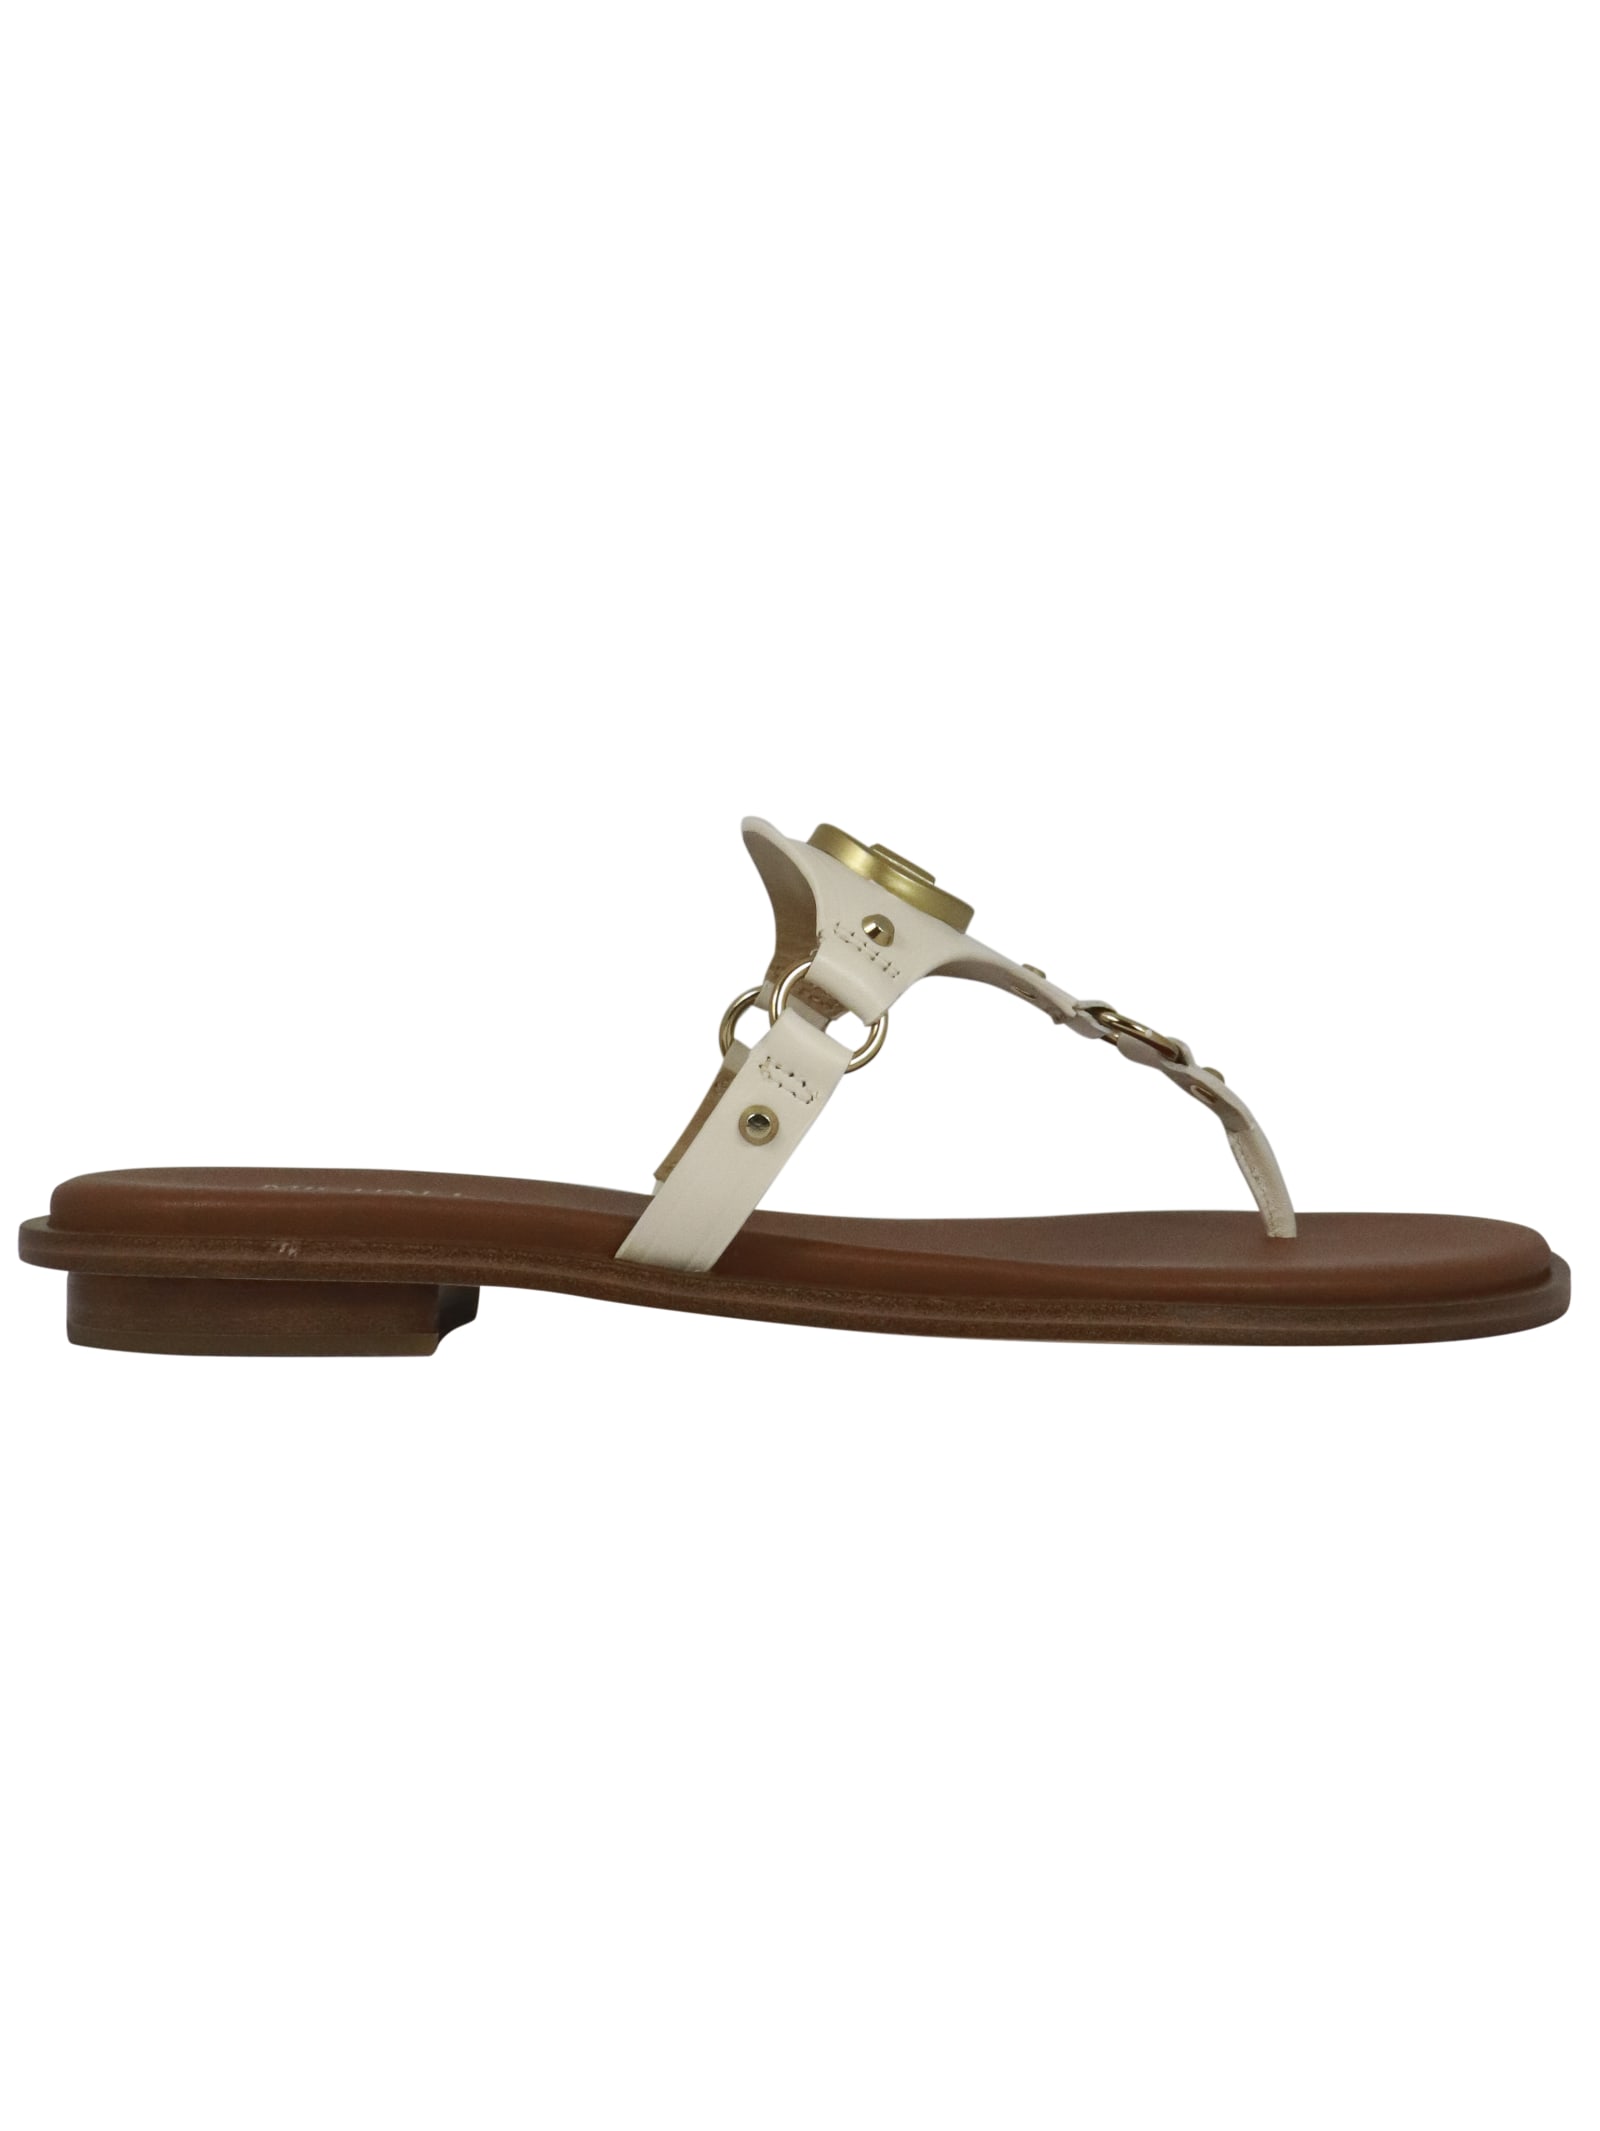 Buy Michael Kors Conway Sandal Sandal online, shop Michael Kors shoes with free shipping